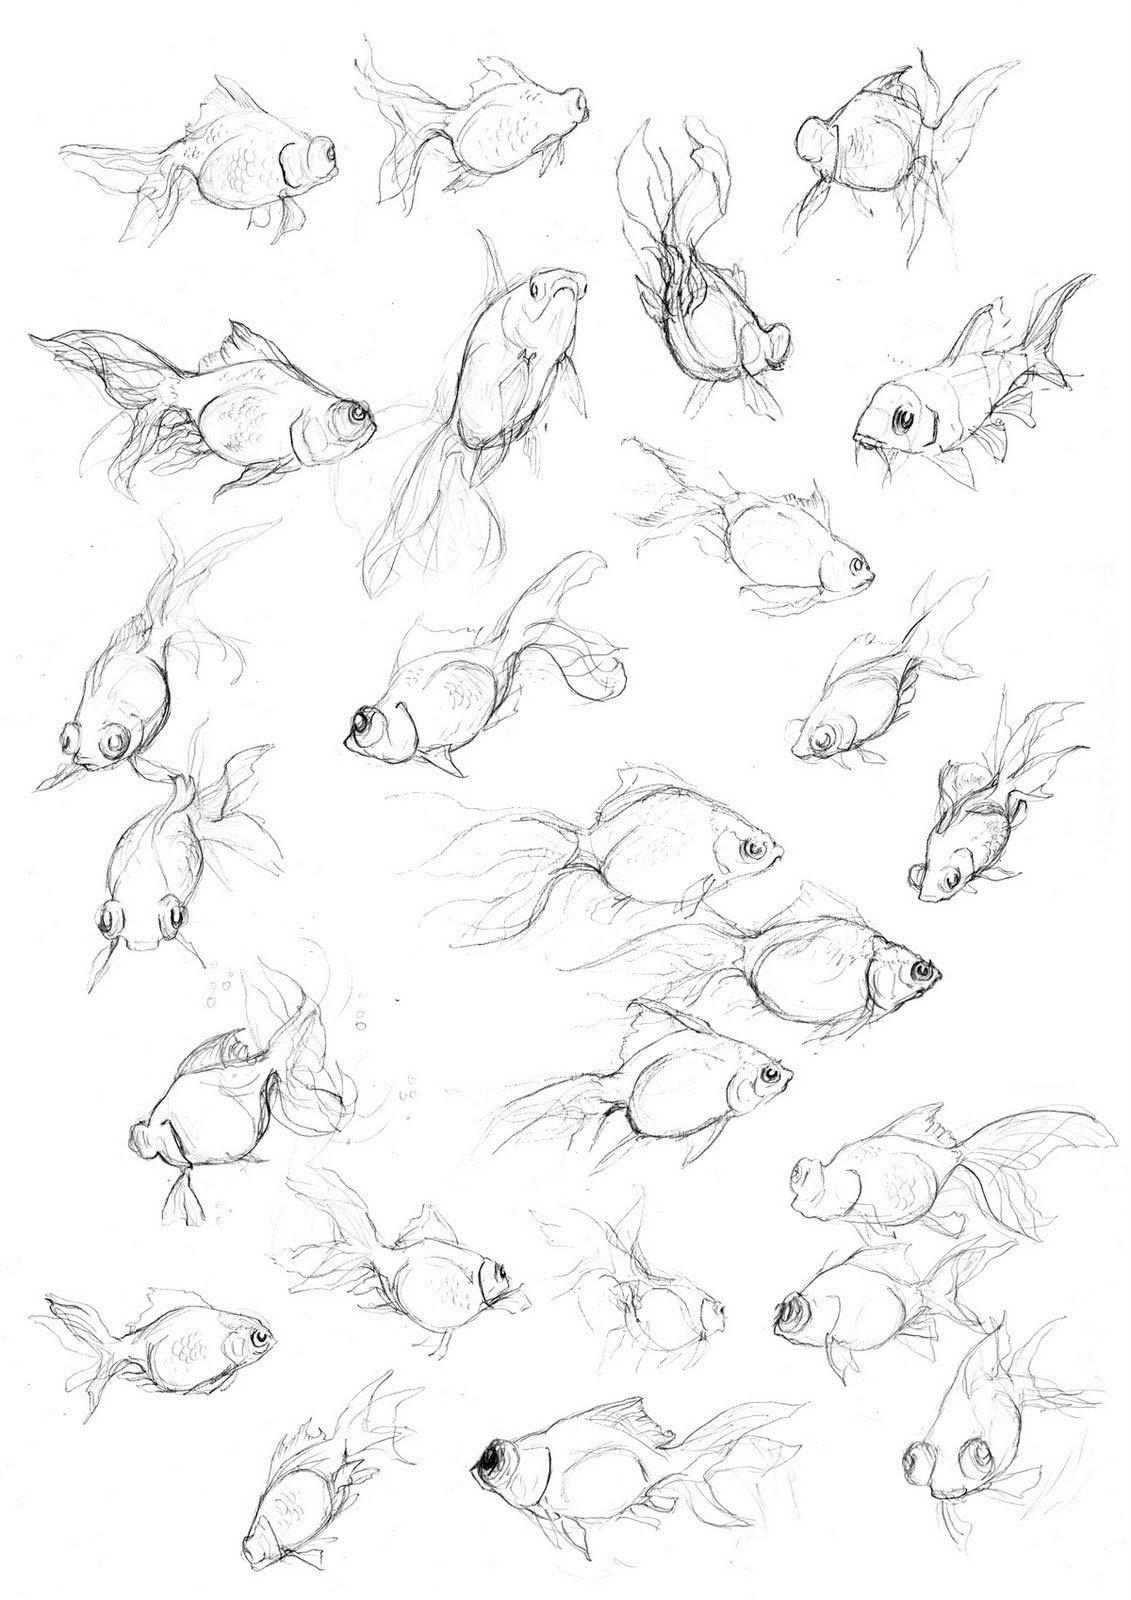 17845 Goldfish Drawing Images Stock Photos  Vectors  Shutterstock